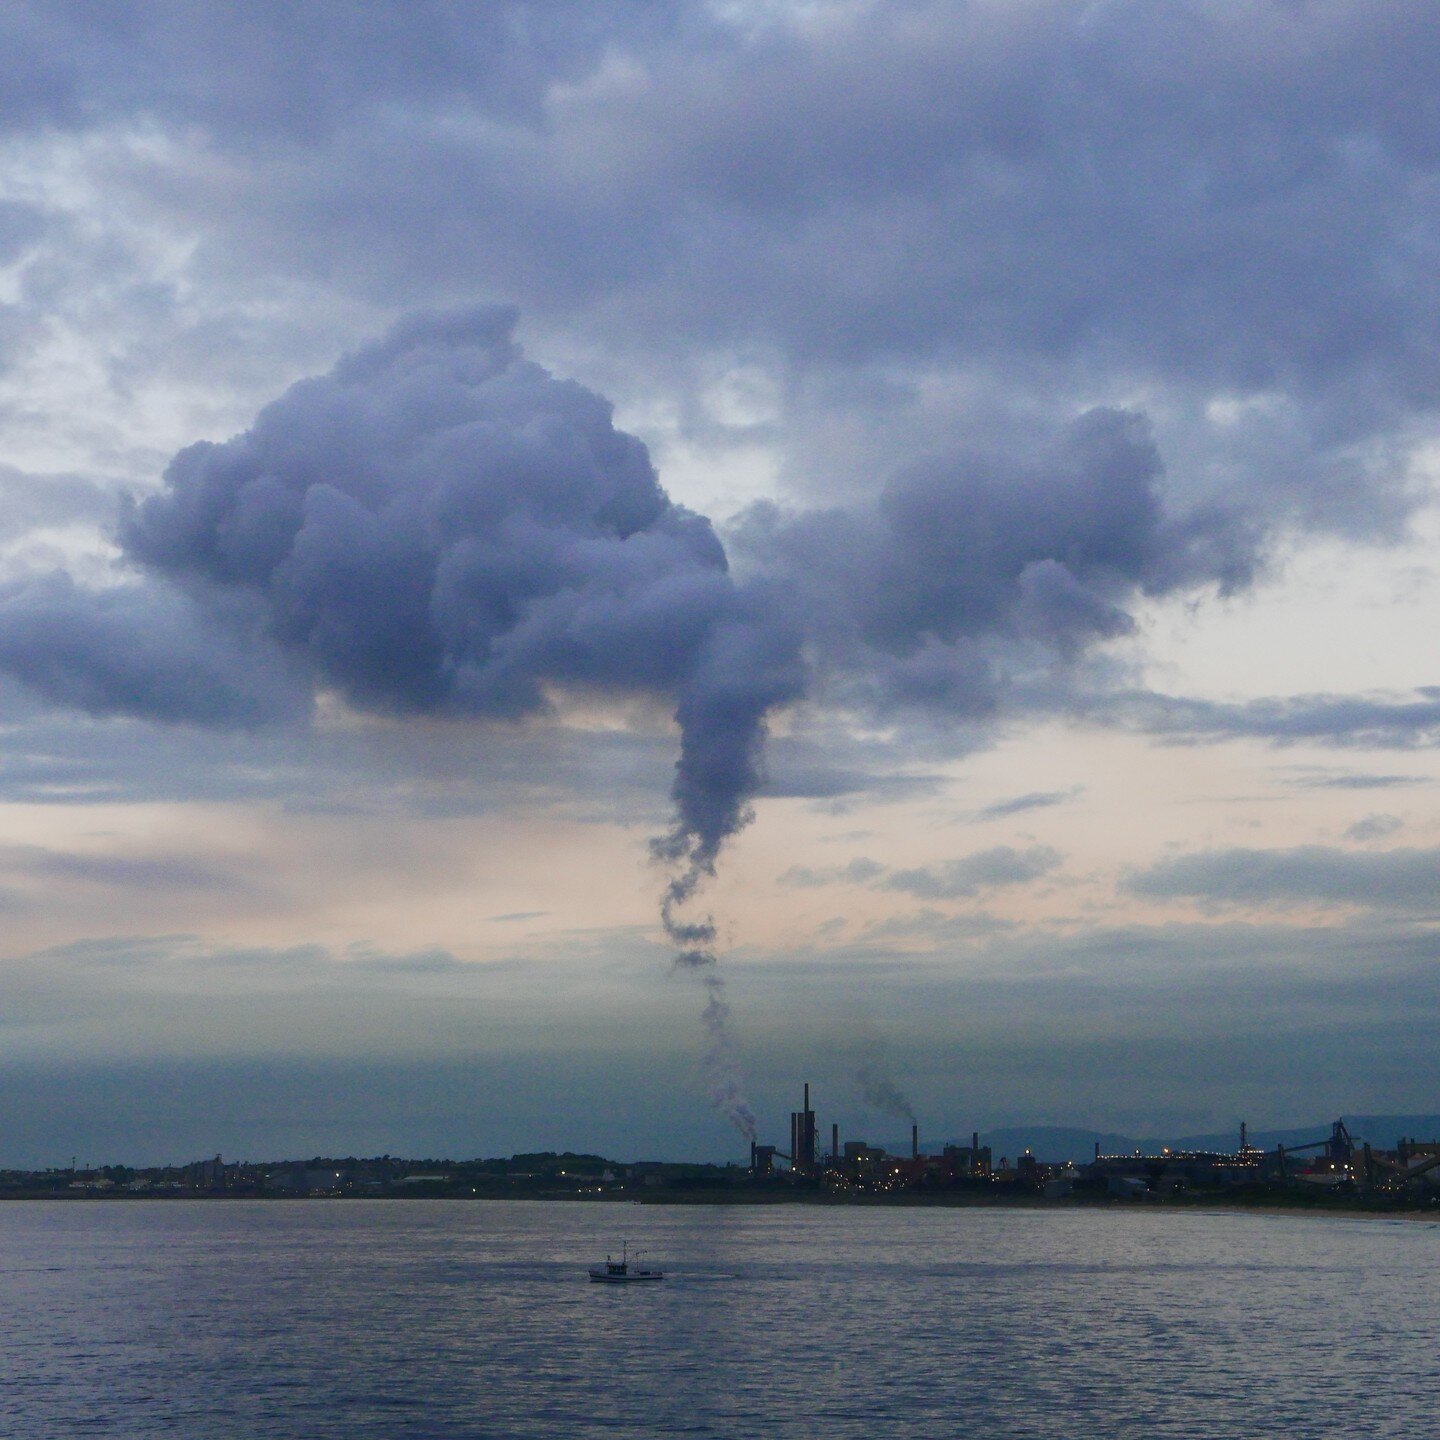 Where clouds come from
#cloudfactory #environment #clouds #cloudscape #smokinggun #pictureofday #industry #steelmakiing #portkembla